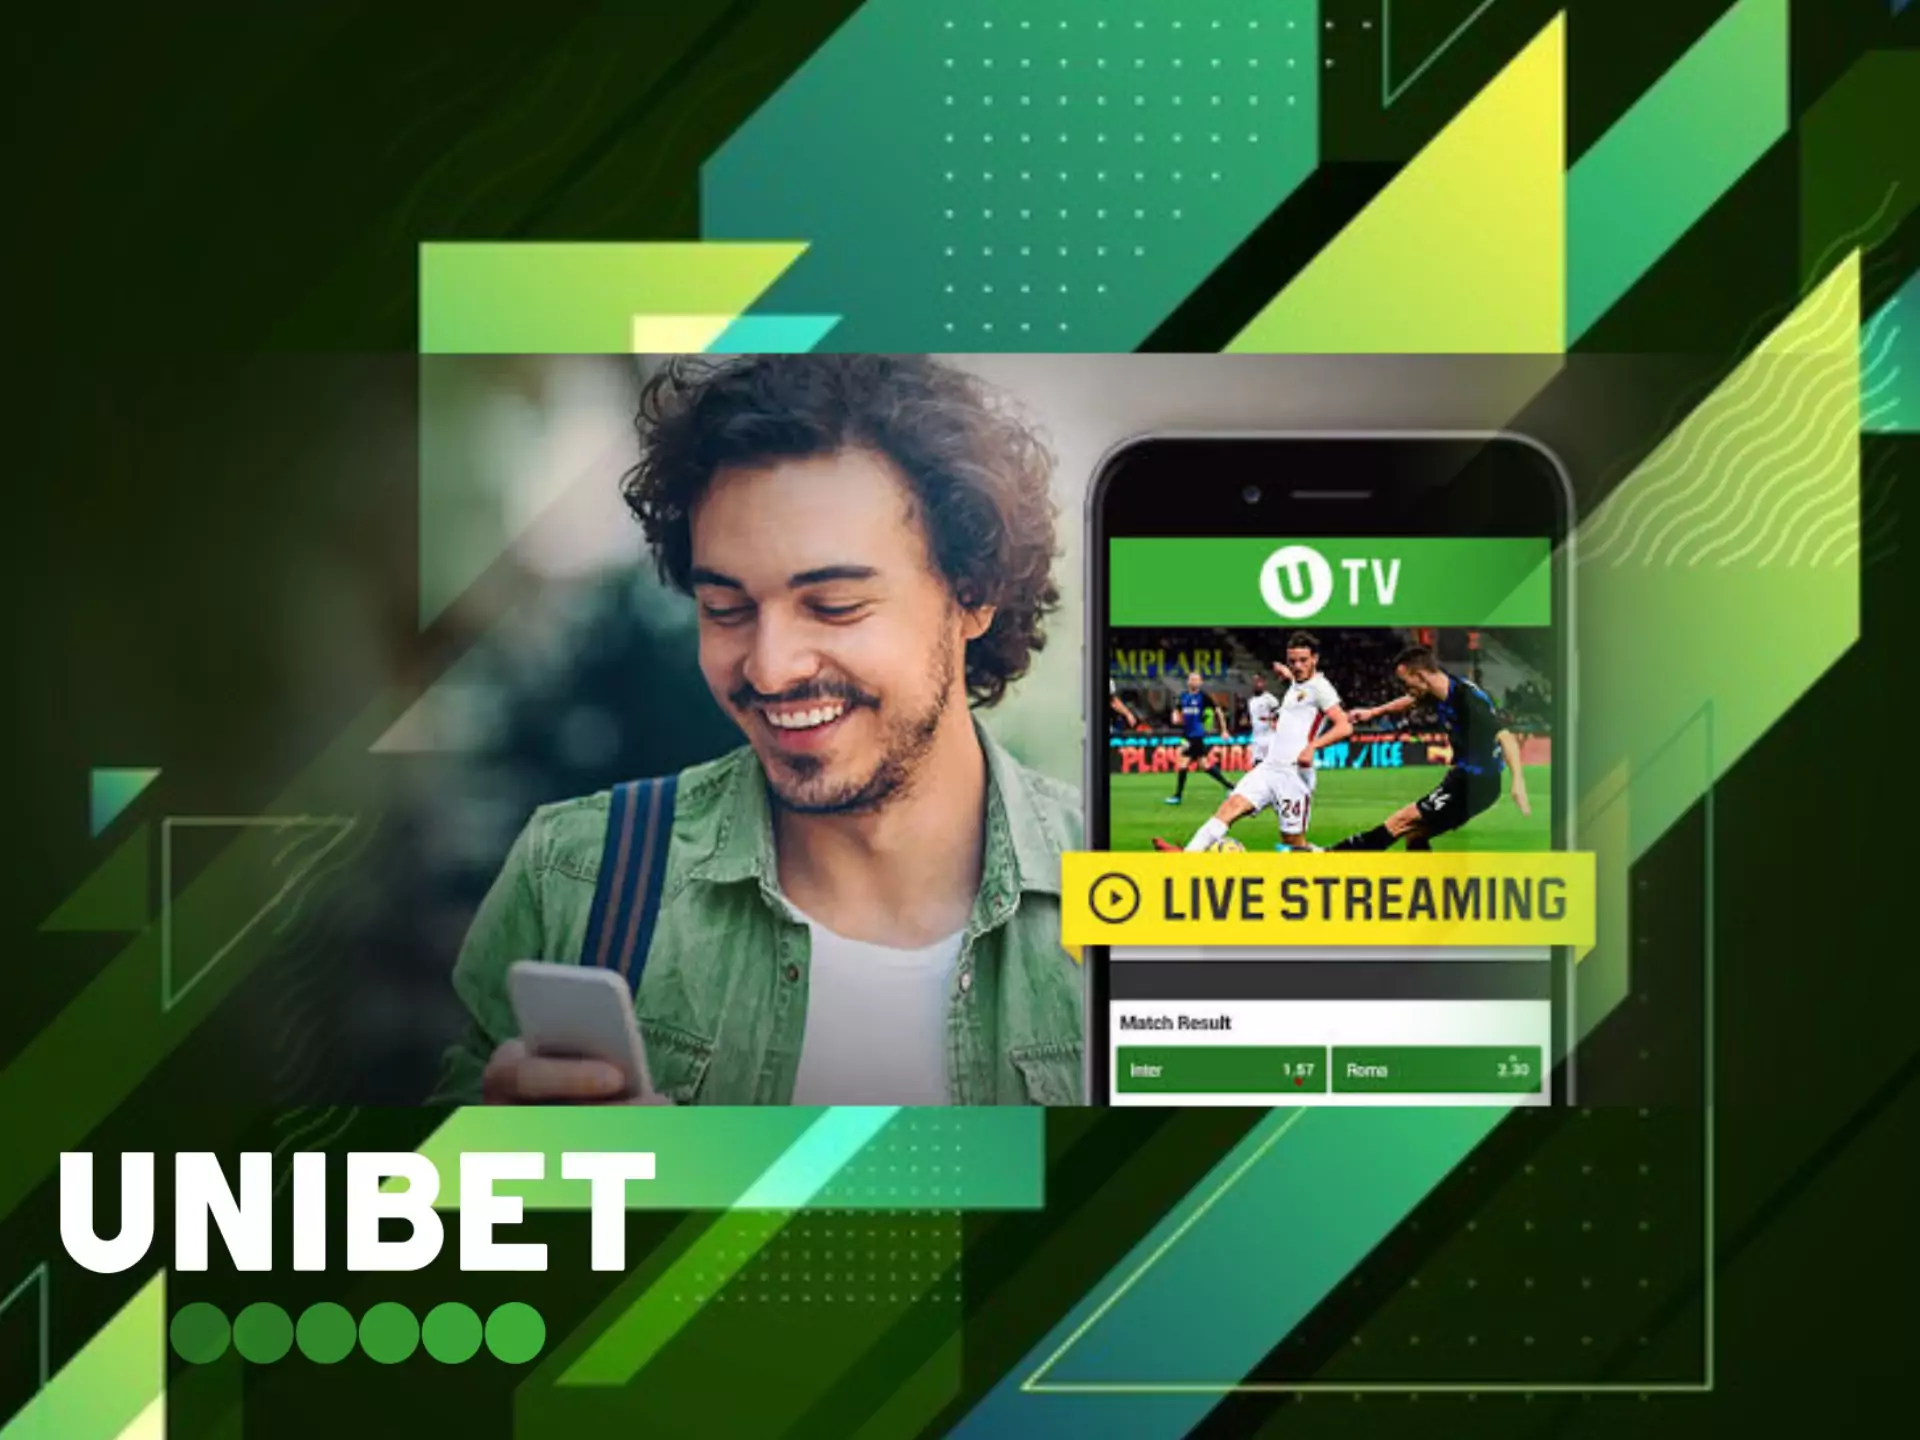 Expperience the atmosphere of live betting with Unibet TV.